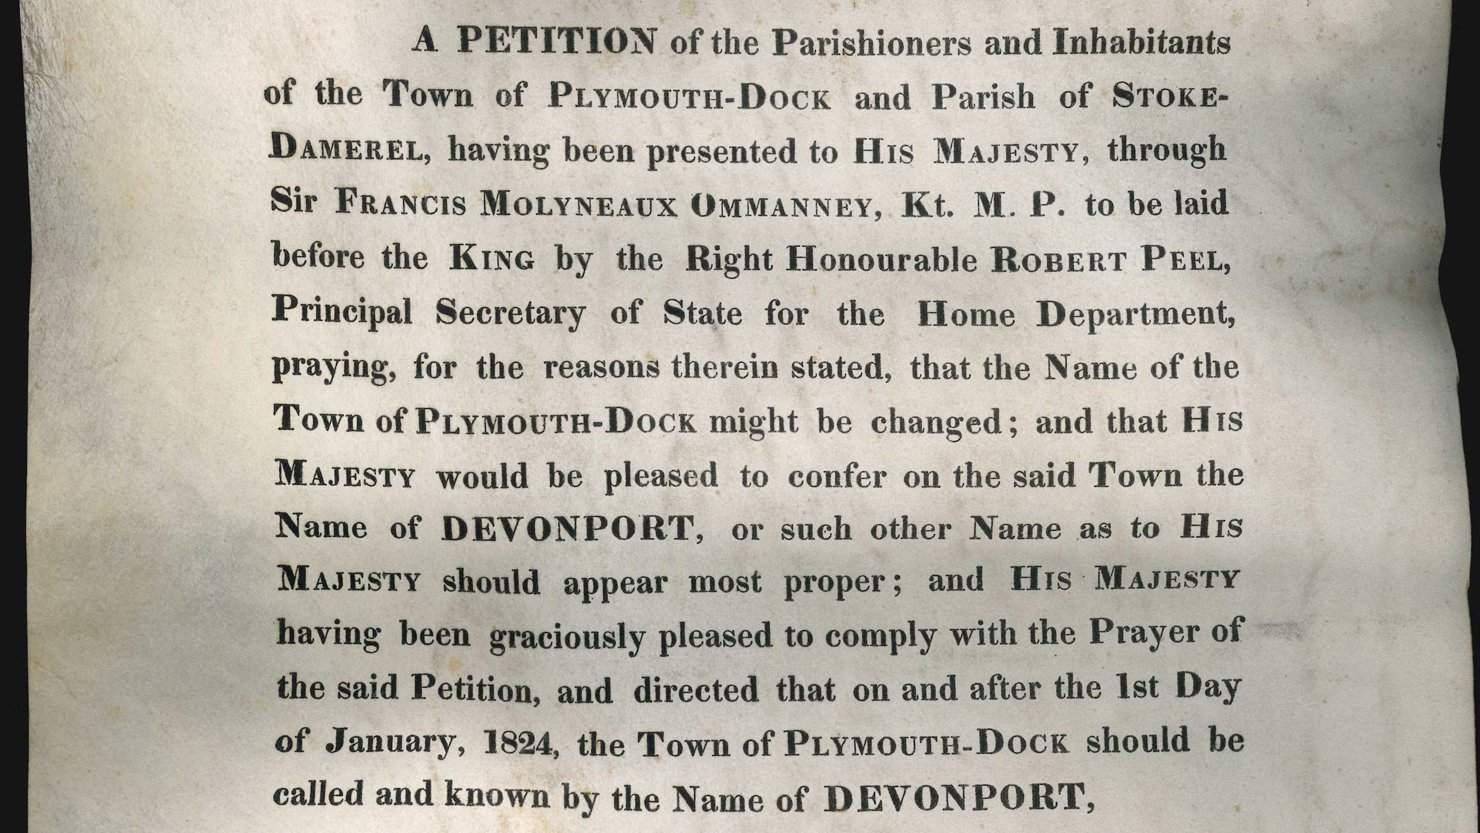 570/113 Petition relating to the change of name from Dock to Devonport. Courtesy of The Box, Plymouth.